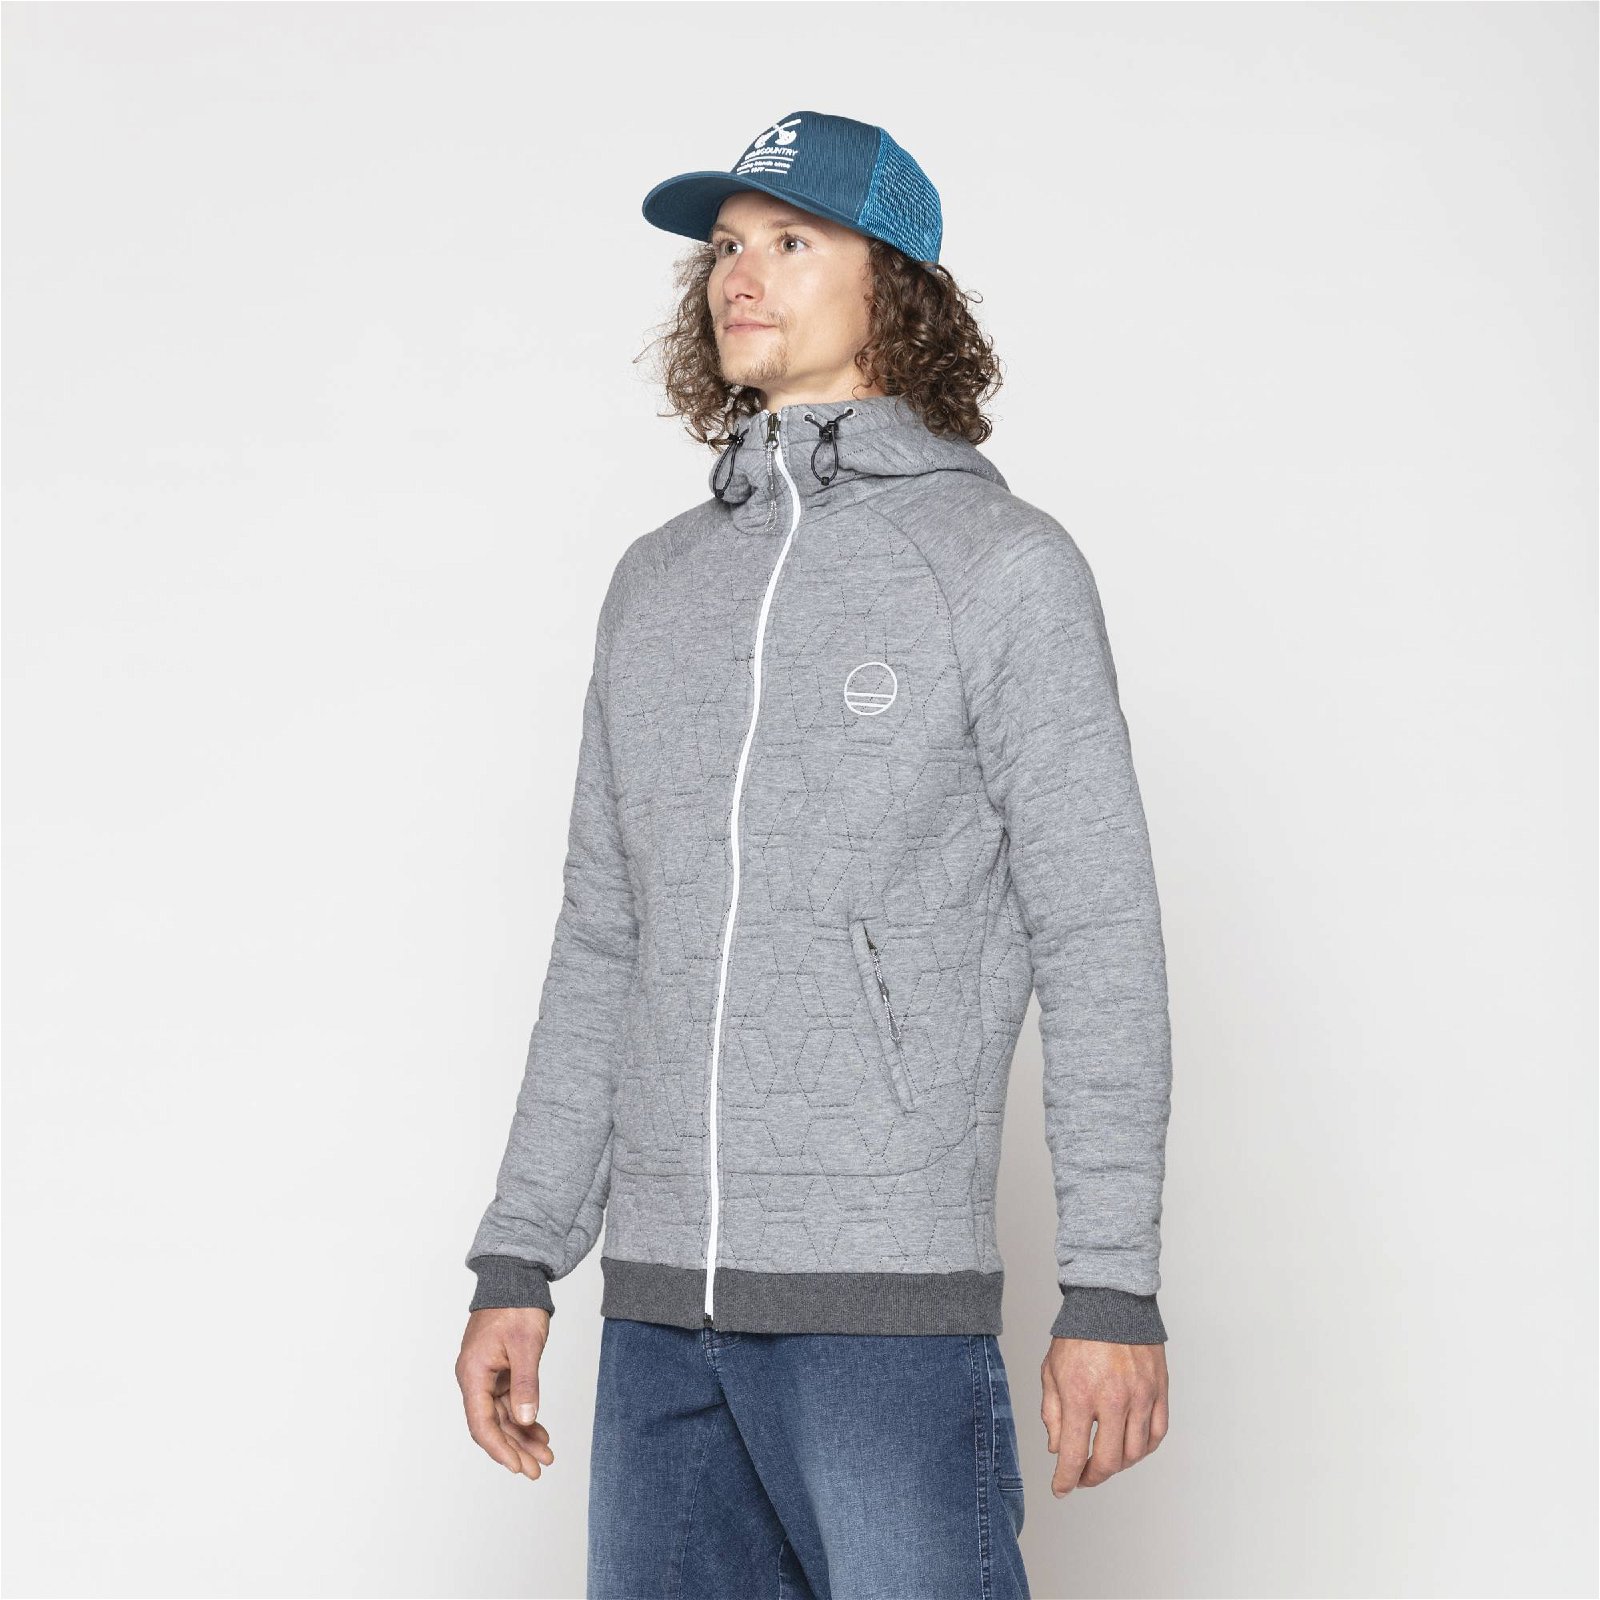 Wild Country Transition M hoody